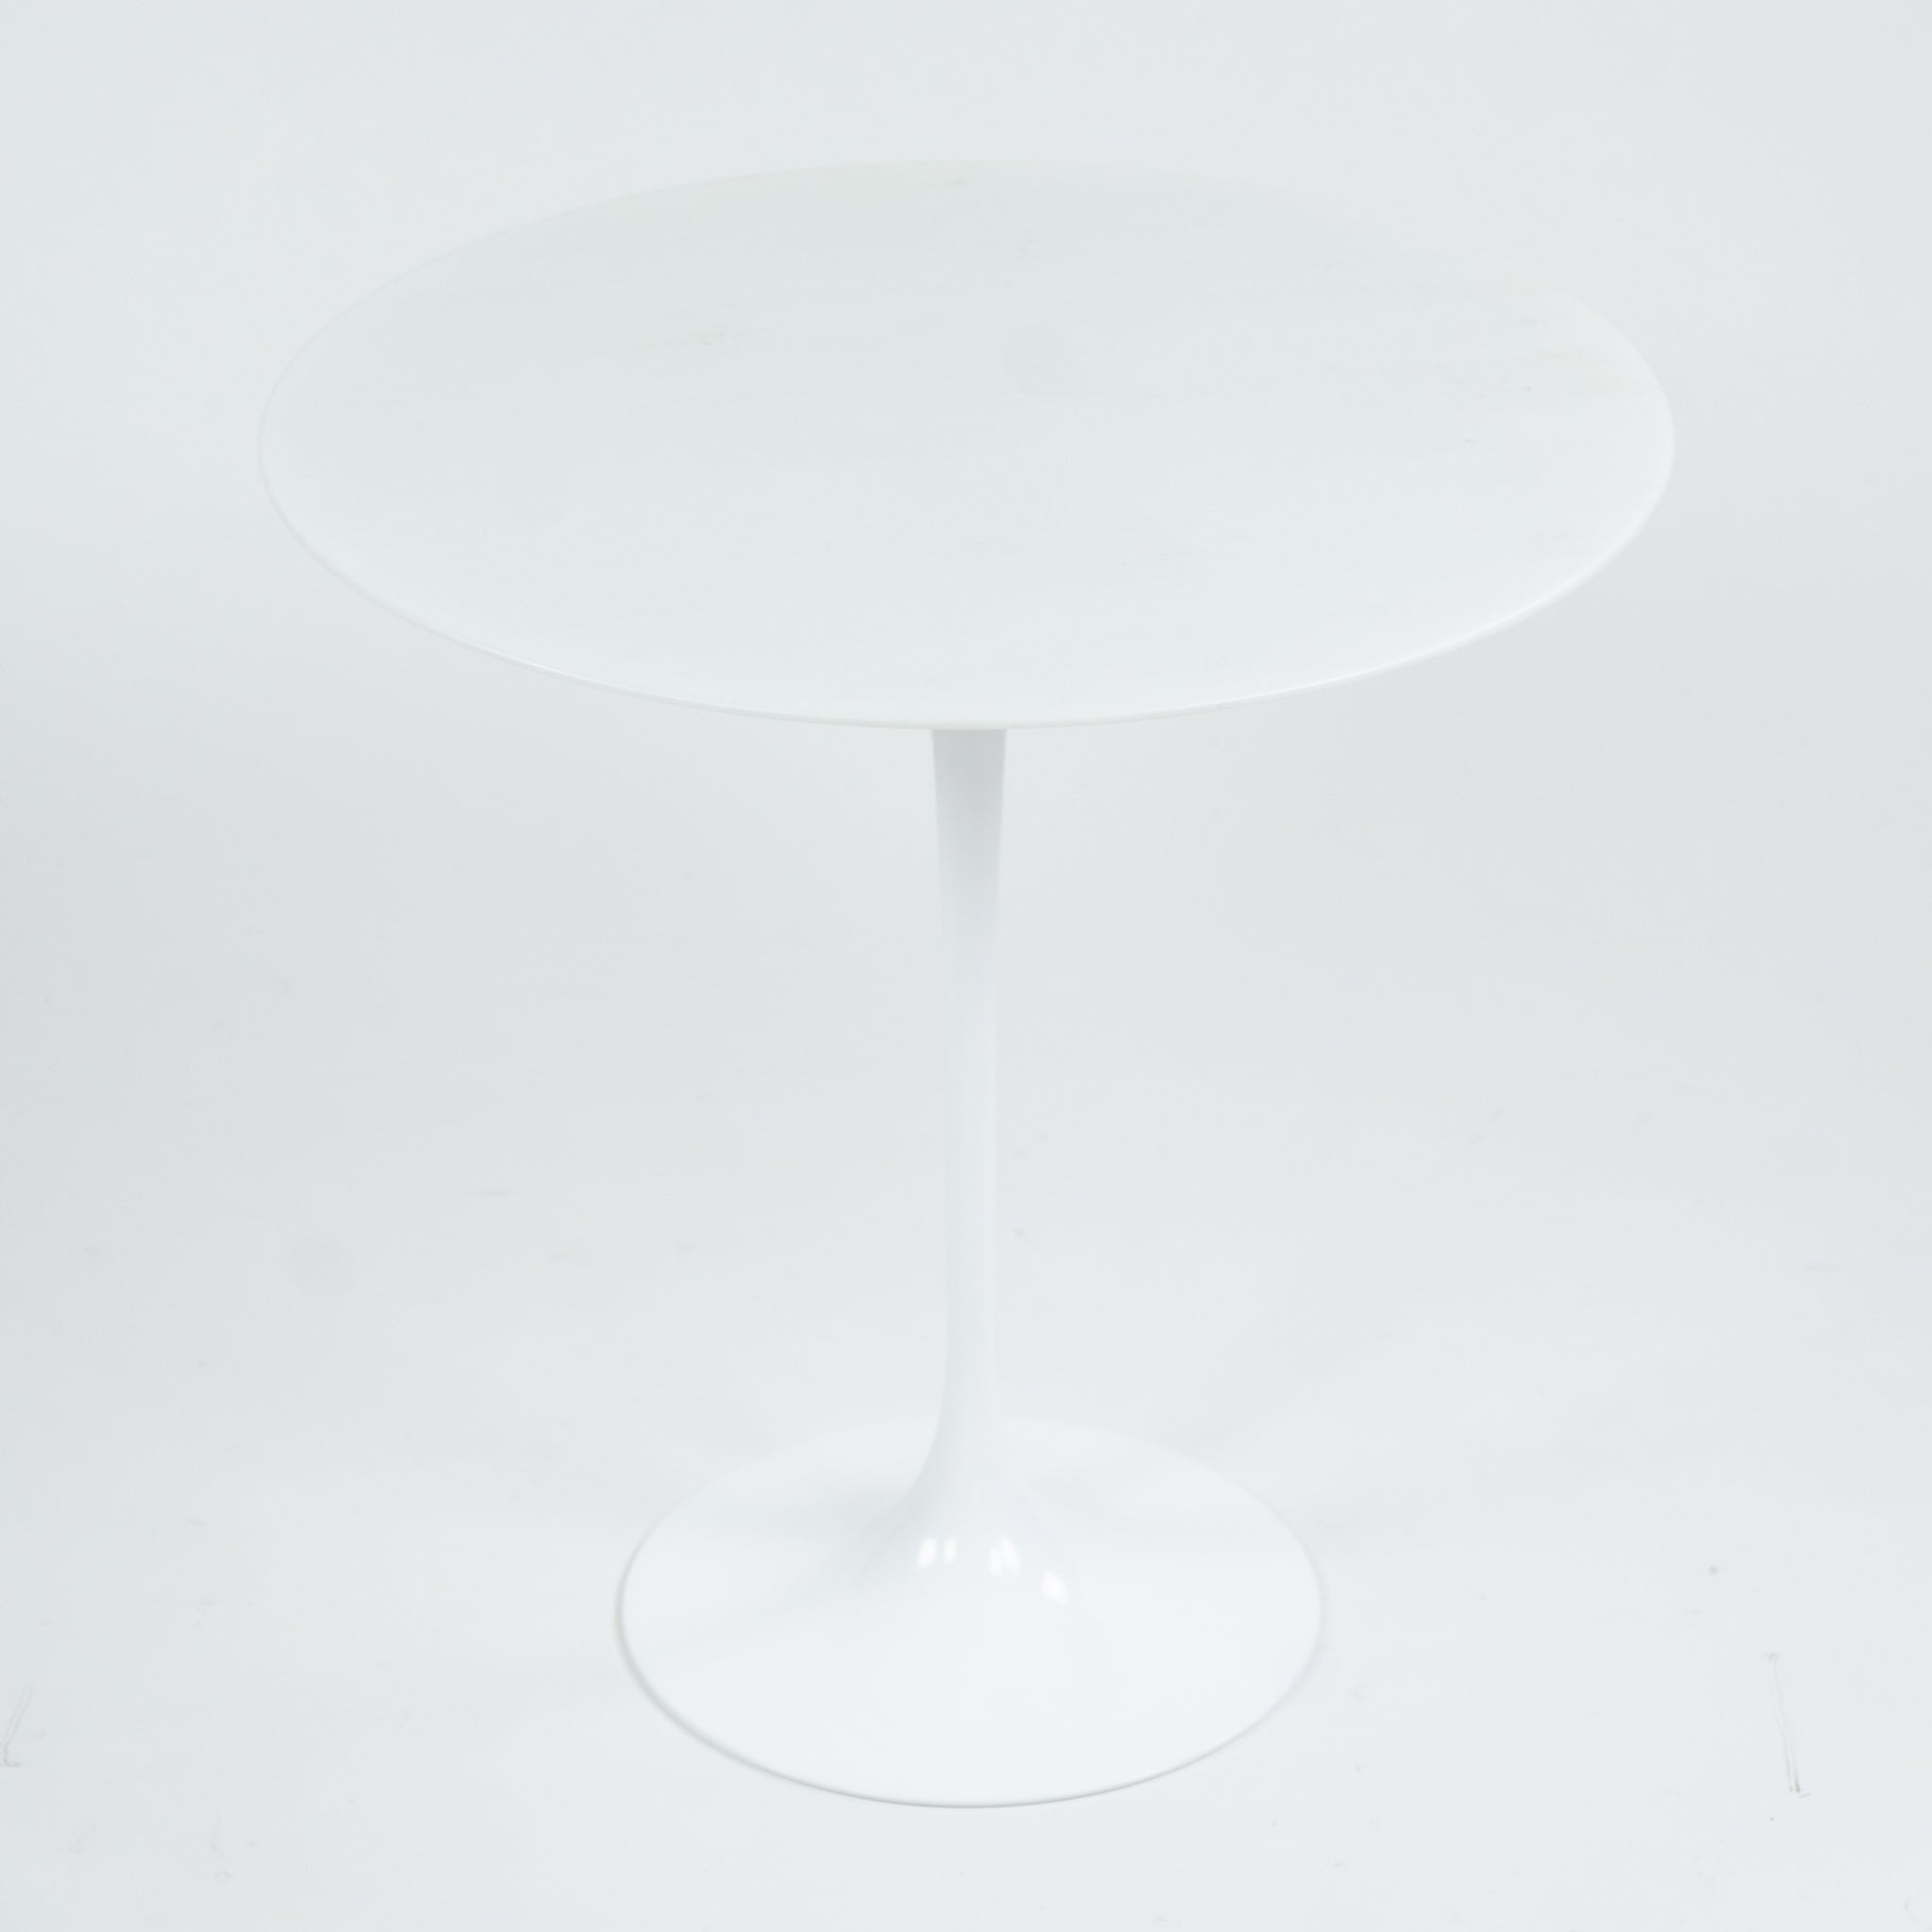 SOLD New Eero Saarinen For Knoll 20 Inch Tulip Side Table Matte White Marble Top 2x